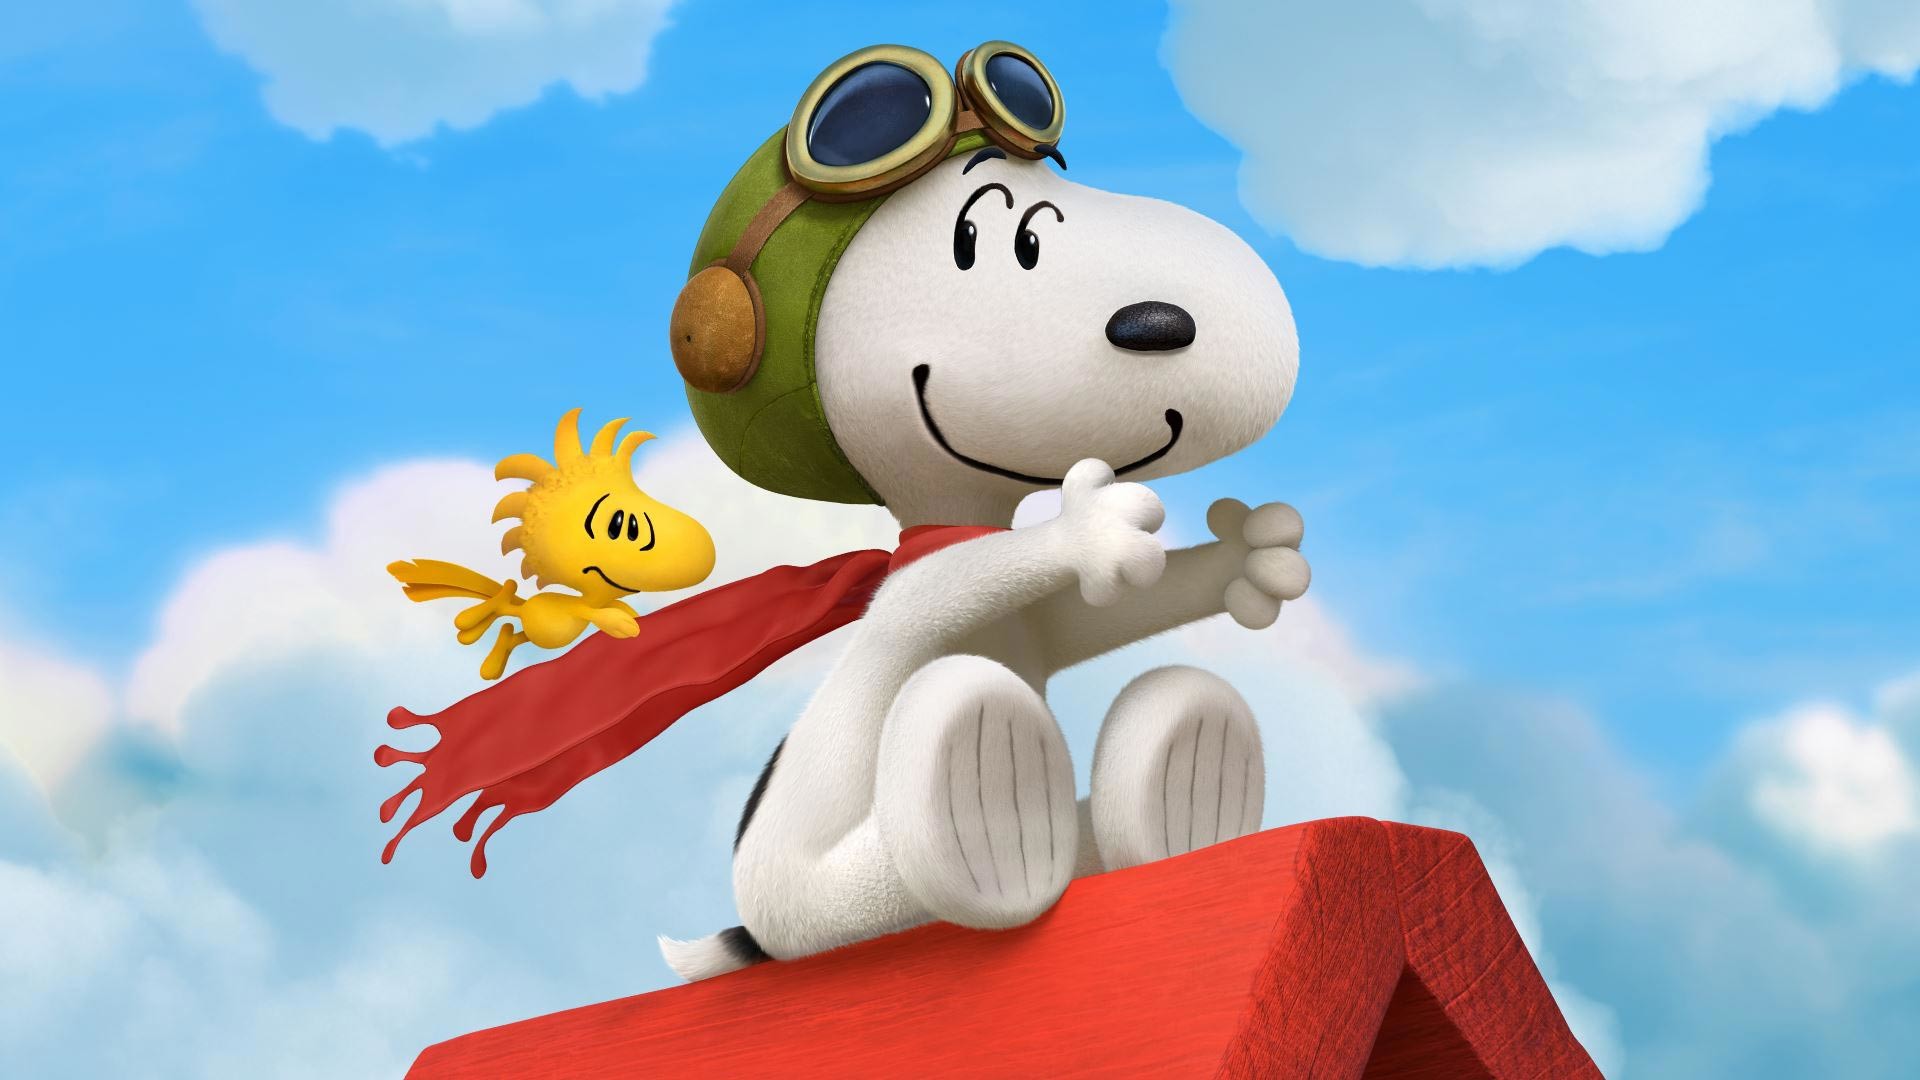 Great artwork released for the Peanuts movie, starring Charlie Brown and  Snoopy with their friends. Featuring characters like Woodstock, Sally, …